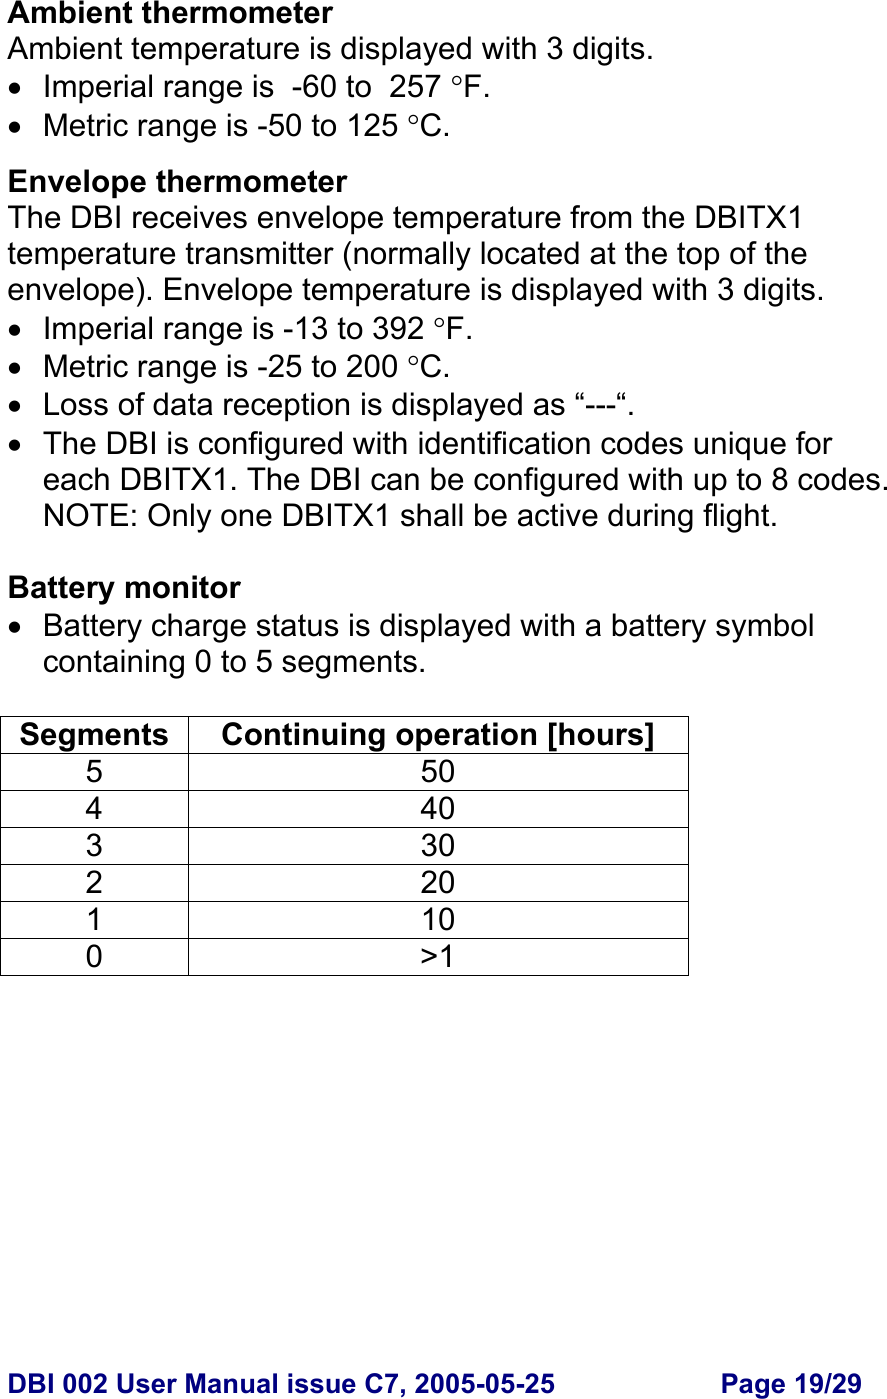  DBI 002 User Manual issue C7, 2005-05-25  Page 19/29  Ambient thermometer Ambient temperature is displayed with 3 digits. •  Imperial range is  -60 to  257 °F. •  Metric range is -50 to 125 °C.  Envelope thermometer The DBI receives envelope temperature from the DBITX1 temperature transmitter (normally located at the top of the envelope). Envelope temperature is displayed with 3 digits. •  Imperial range is -13 to 392 °F. •  Metric range is -25 to 200 °C. • Loss of data reception is displayed as “---“. •  The DBI is configured with identification codes unique for each DBITX1. The DBI can be configured with up to 8 codes. NOTE: Only one DBITX1 shall be active during flight.  Battery monitor •  Battery charge status is displayed with a battery symbol containing 0 to 5 segments.  Segments Continuing operation [hours] 5 50 4 40 3 30 2 20 1 10 0 &gt;1 